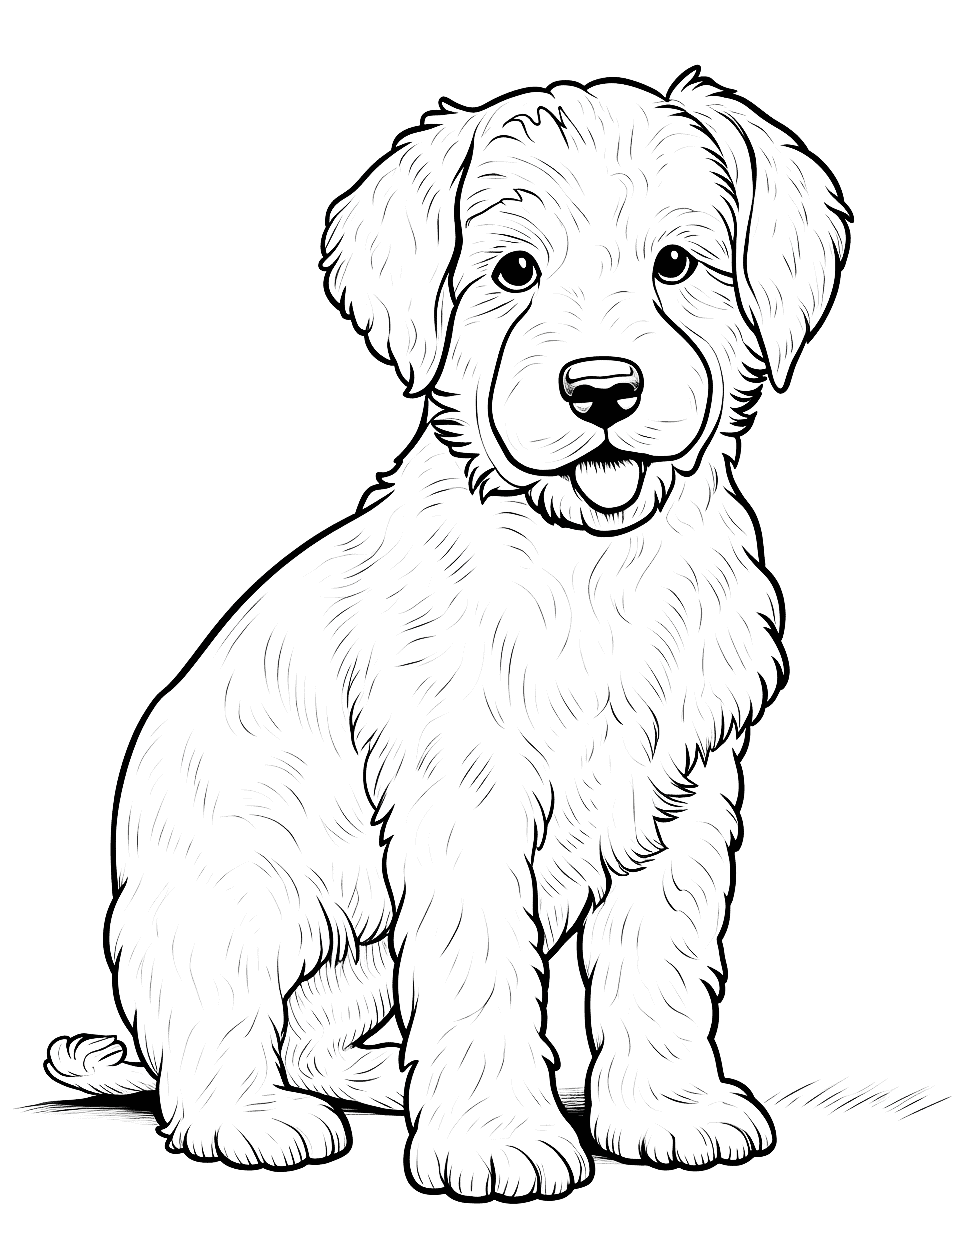 Delightfully Detailed Goldendoodle Portrait Puppy Coloring Page - A detailed portrait of a Goldendoodle puppy showcasing the texture of its fur.